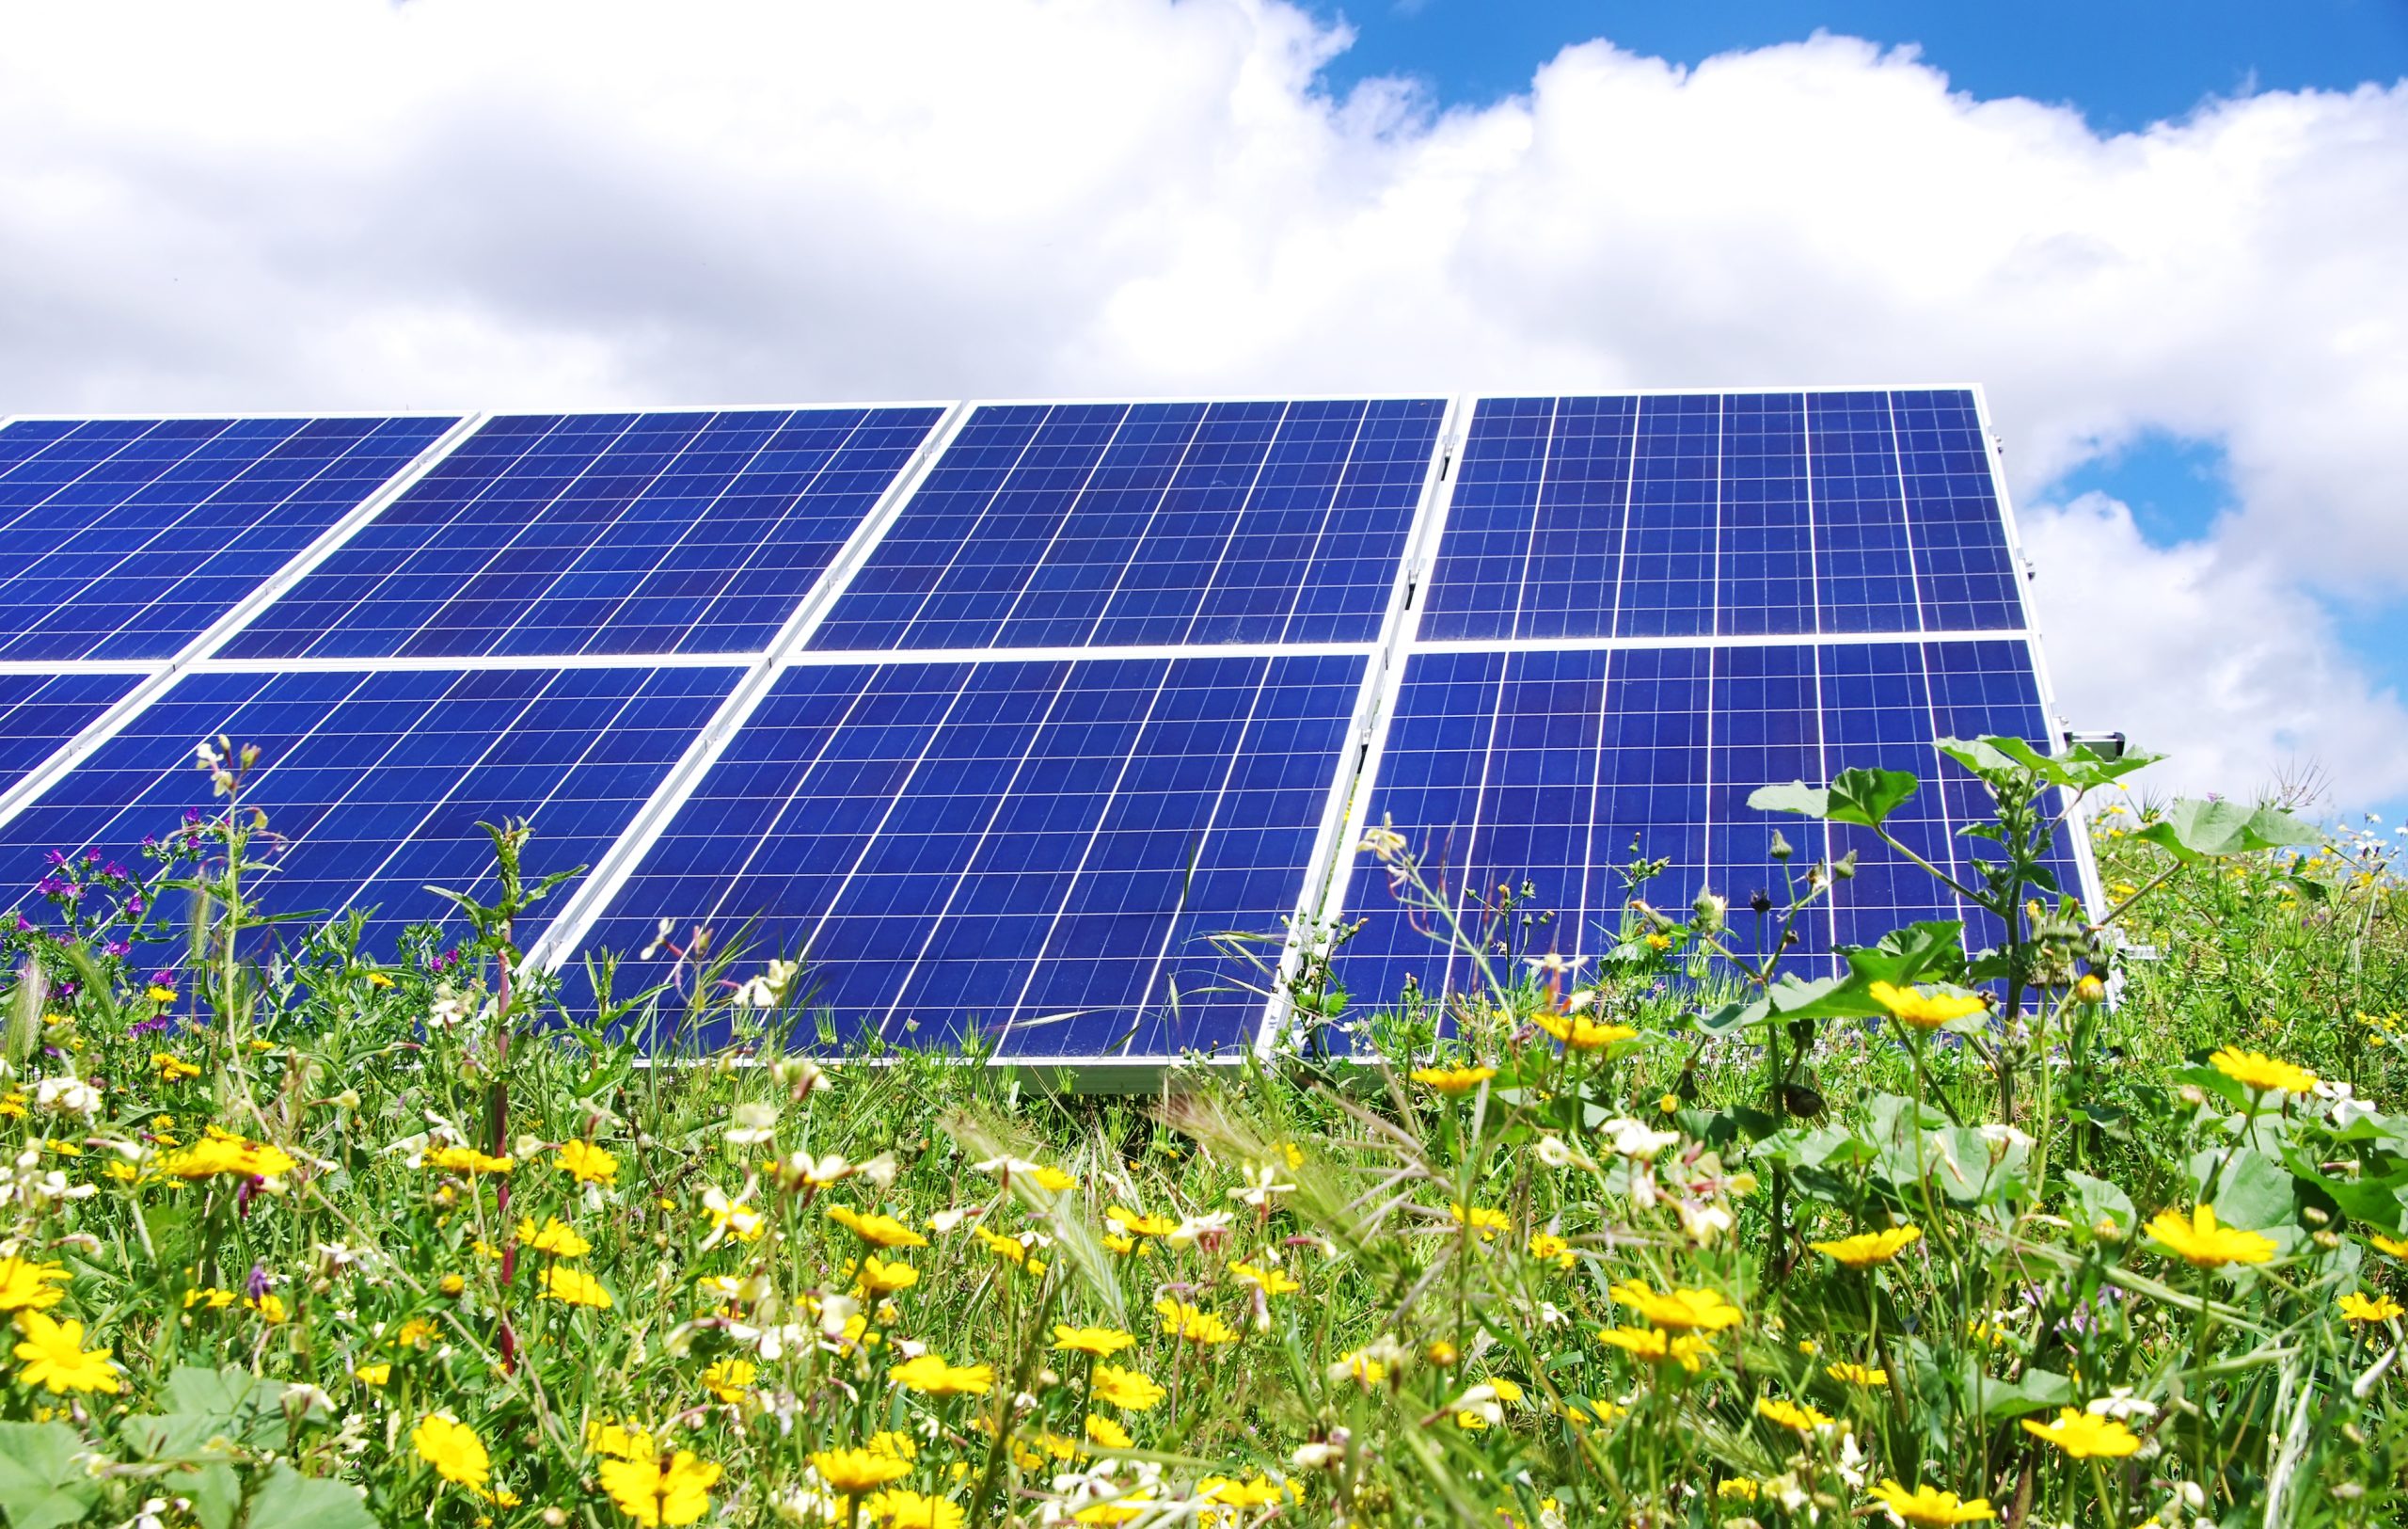 Consultation begins on proposed solar farm in North Kesteven which could power over 180,000 homes